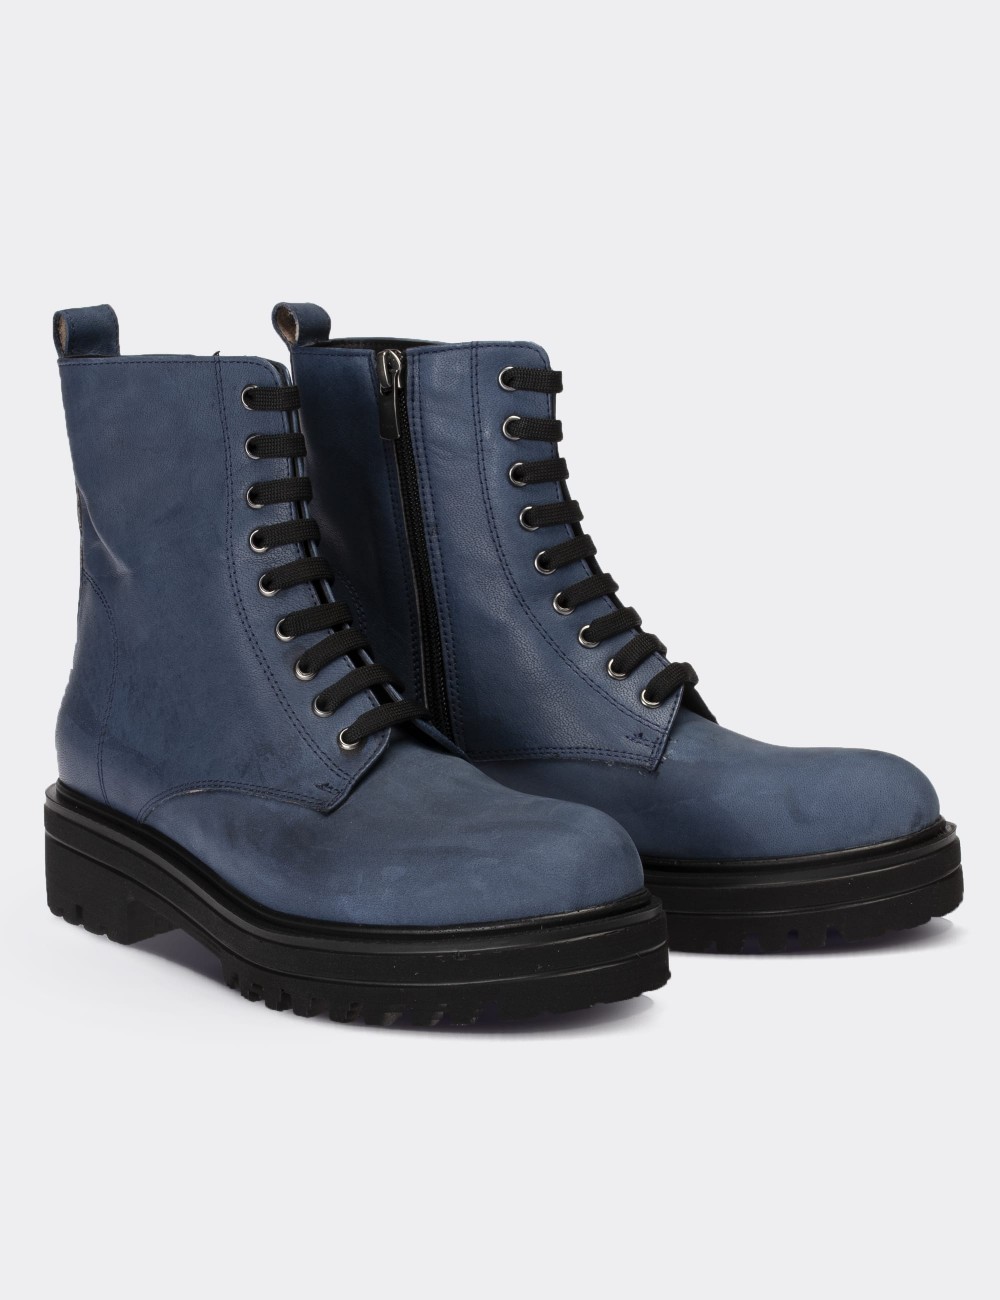 Blue  Leather  Boots - 01814ZMVIE12